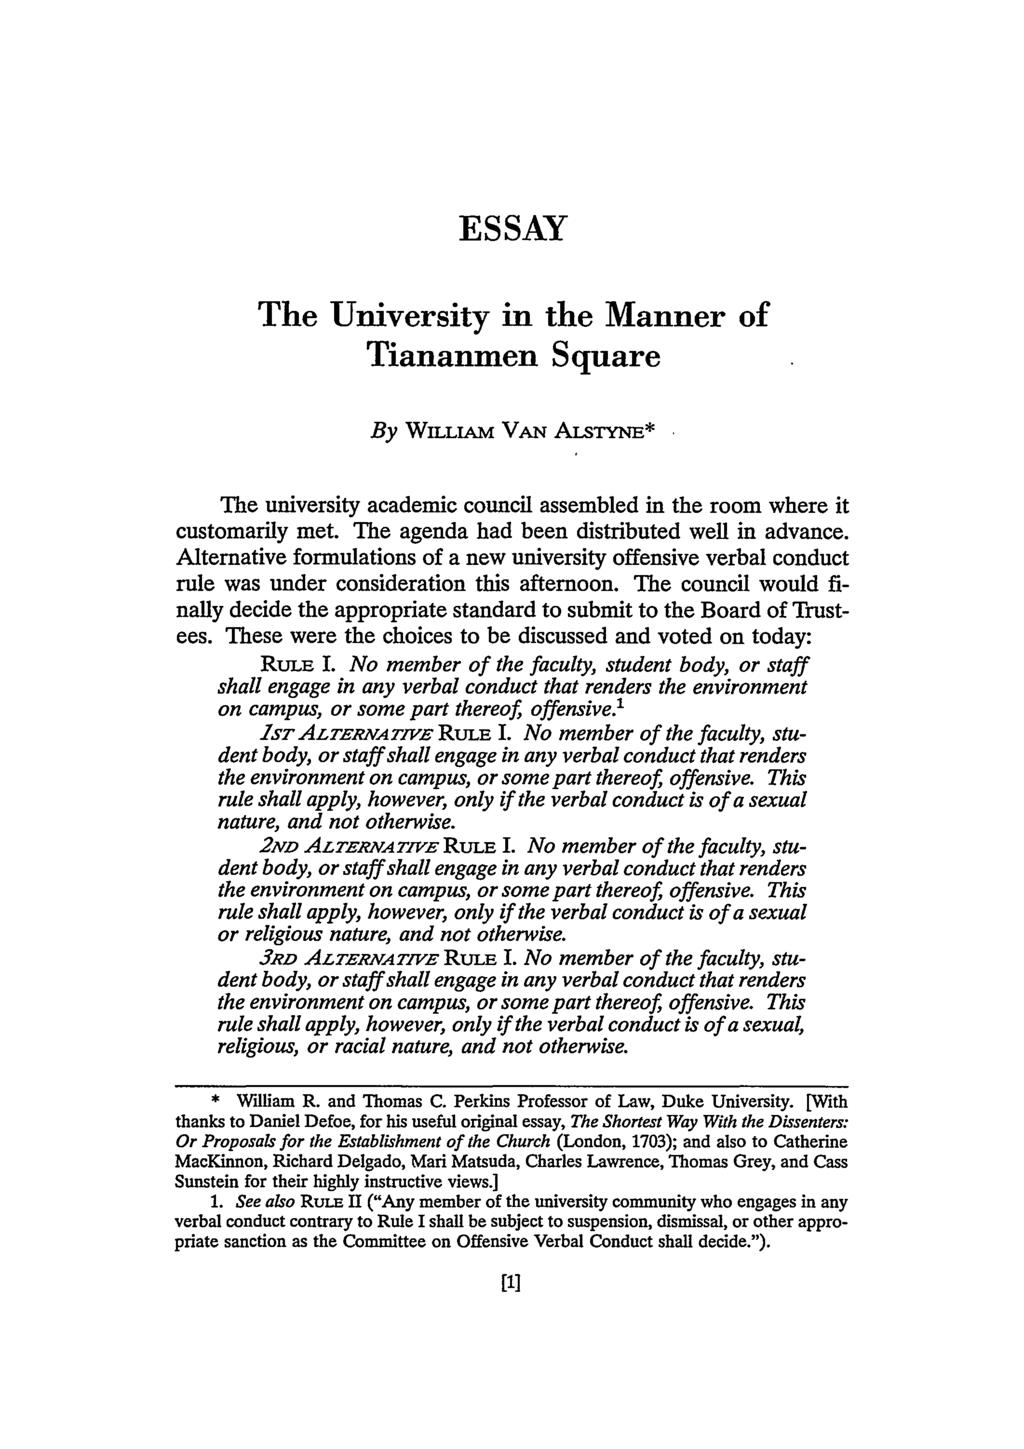 ESSAY The University in the Manner of Tiananmen Square By WILLIAM van ALsTYNE* The university academic council assembled in the room where it customarily met.